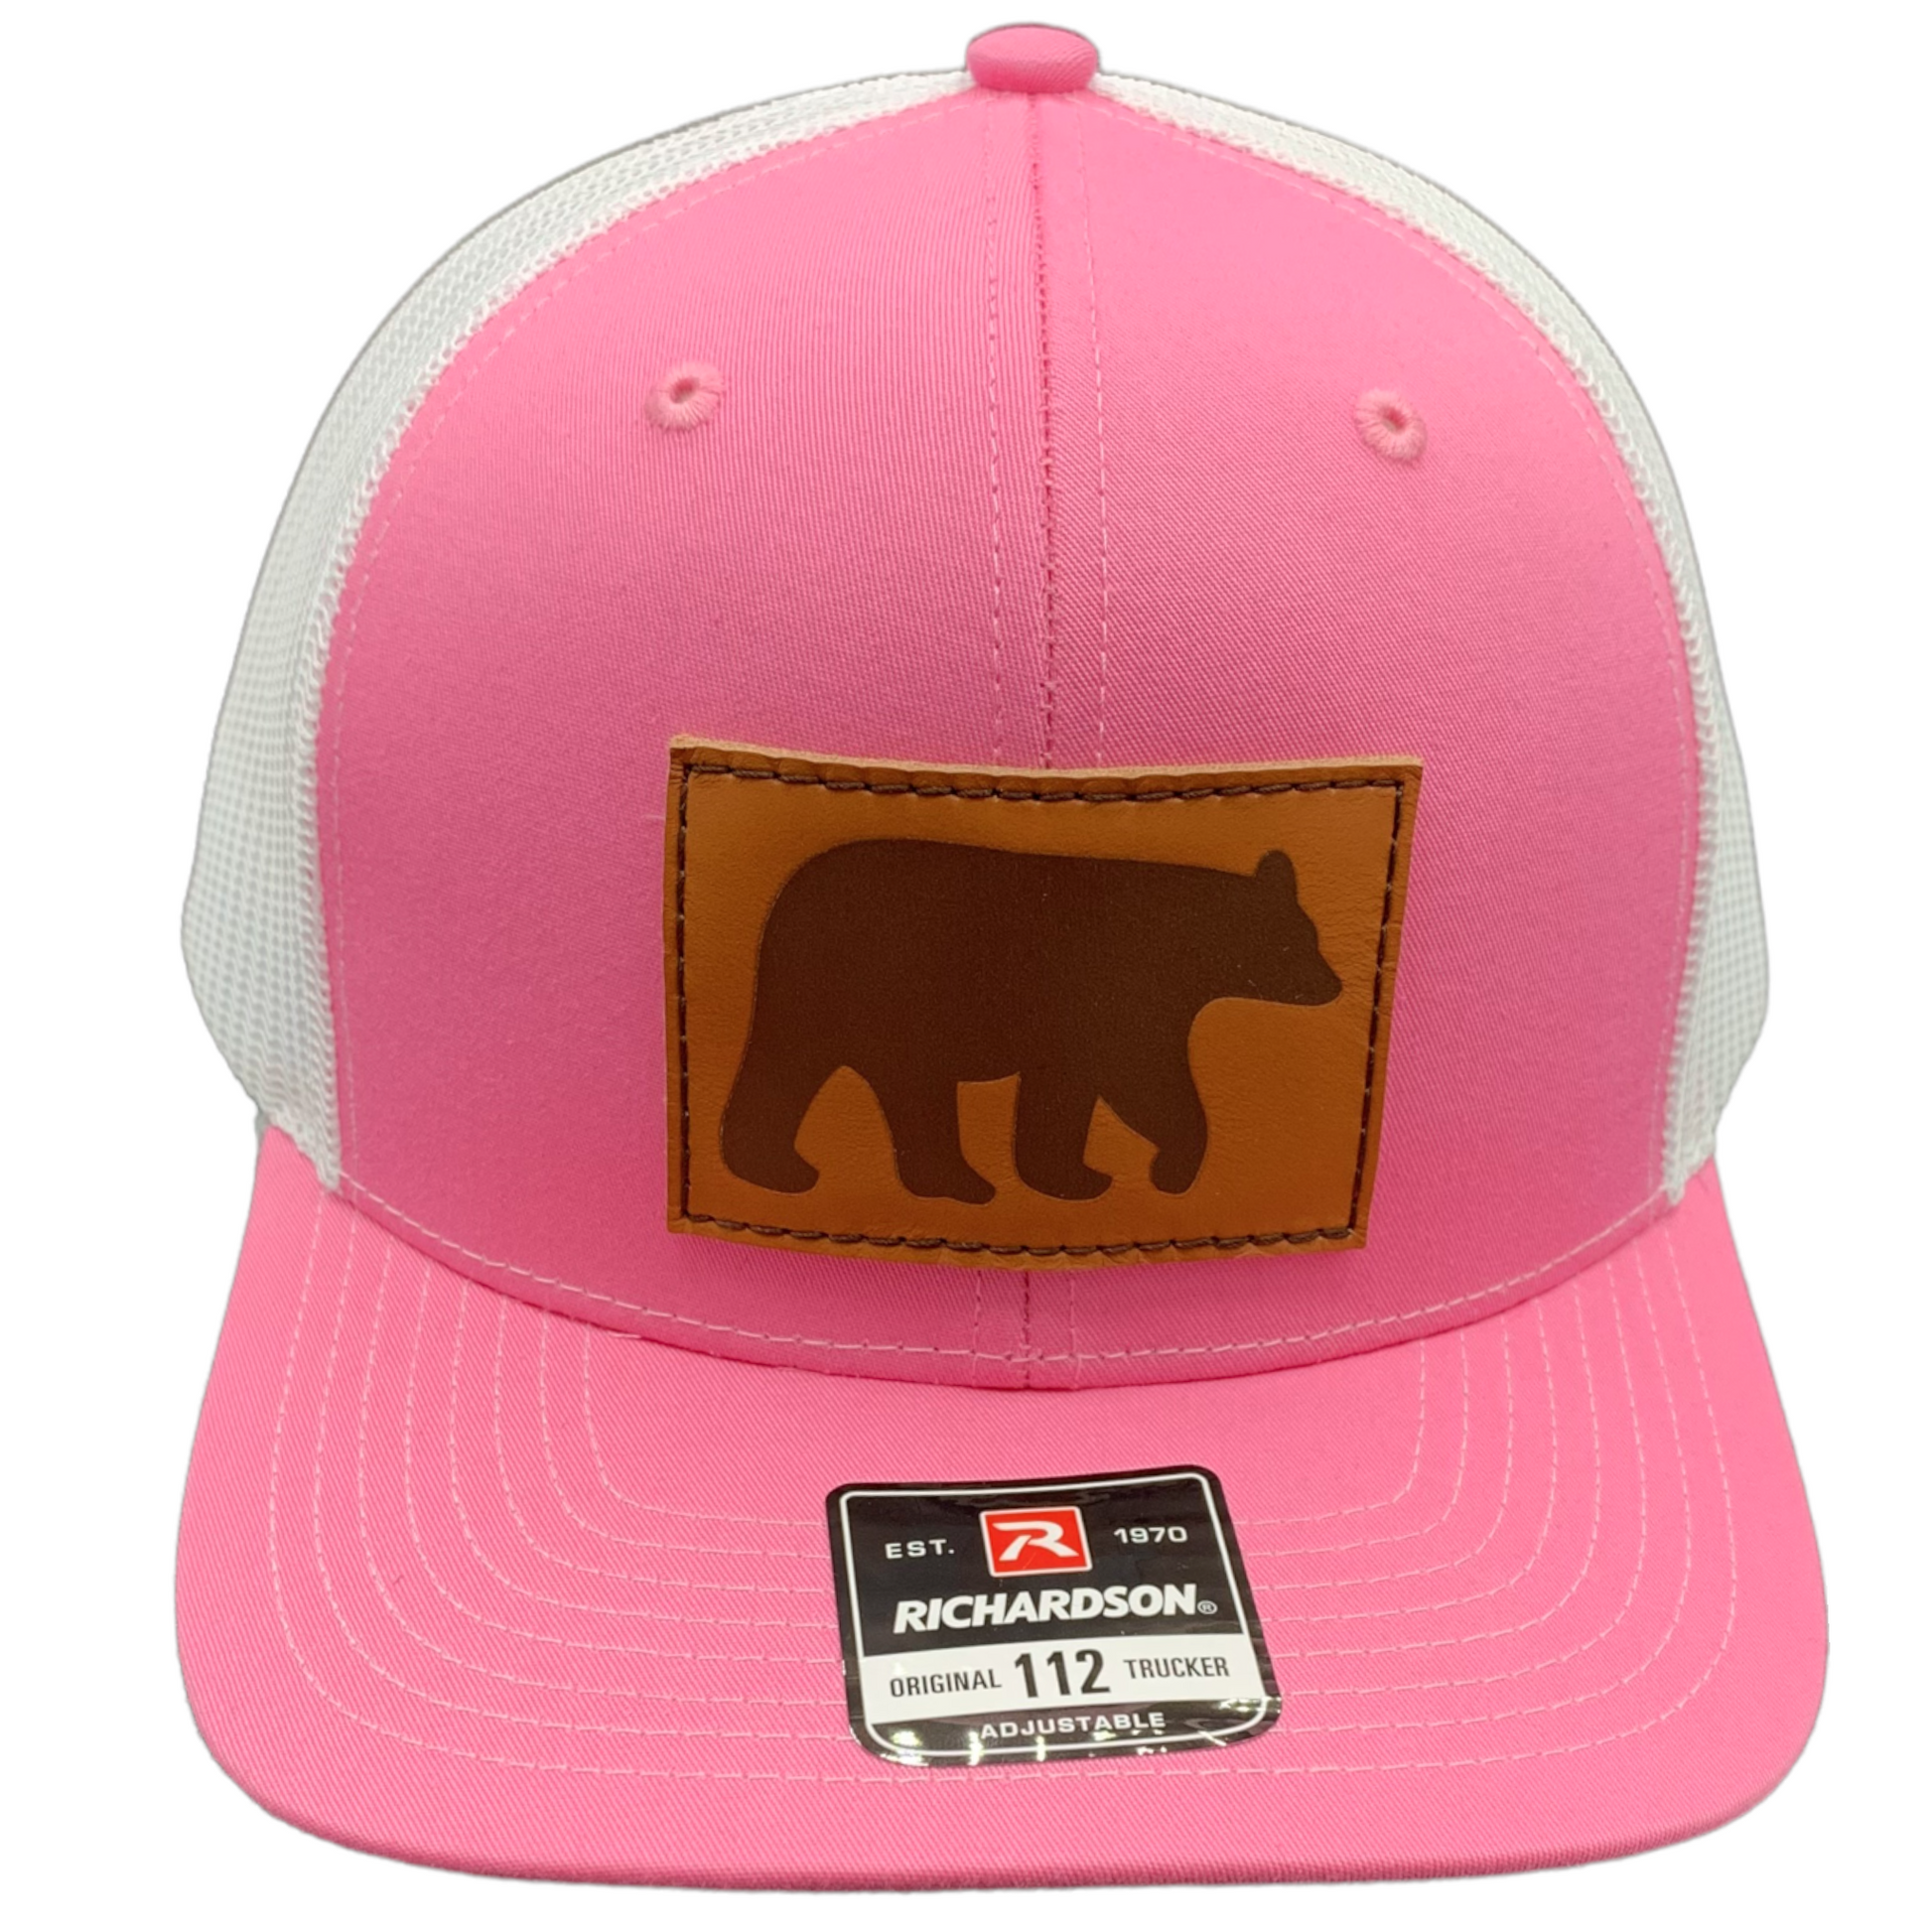 Burton Leather Patch Trucker Baseball Hat Hot Pink and White - The ASHEVILLE Co. TM